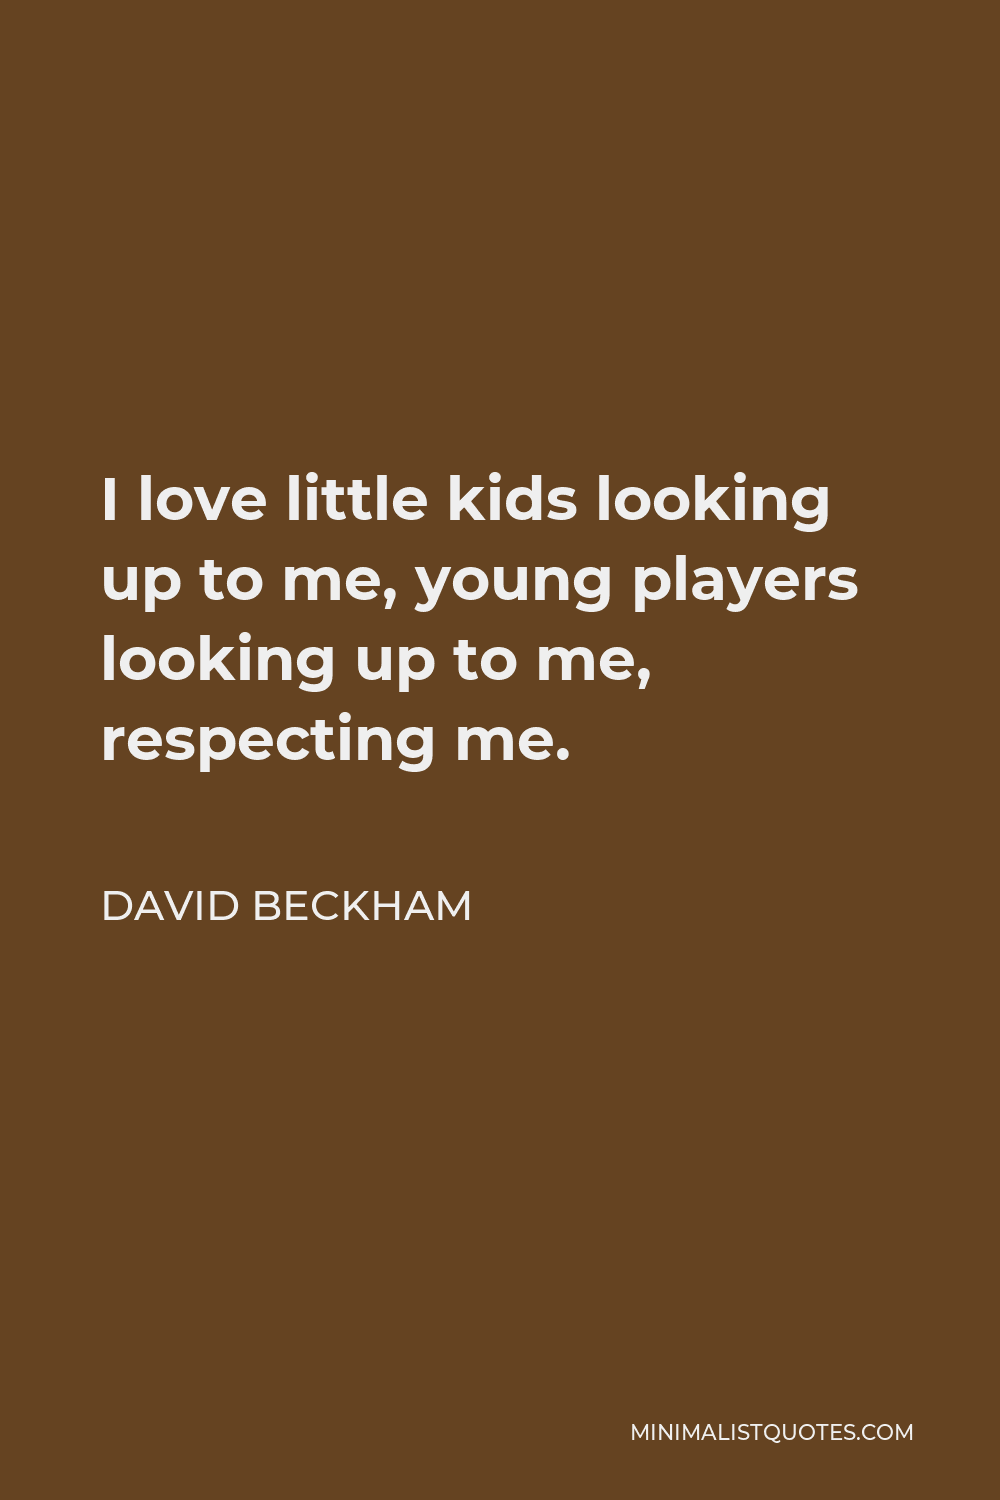 David Beckham Quote - I love little kids looking up to me, young players looking up to me, respecting me.